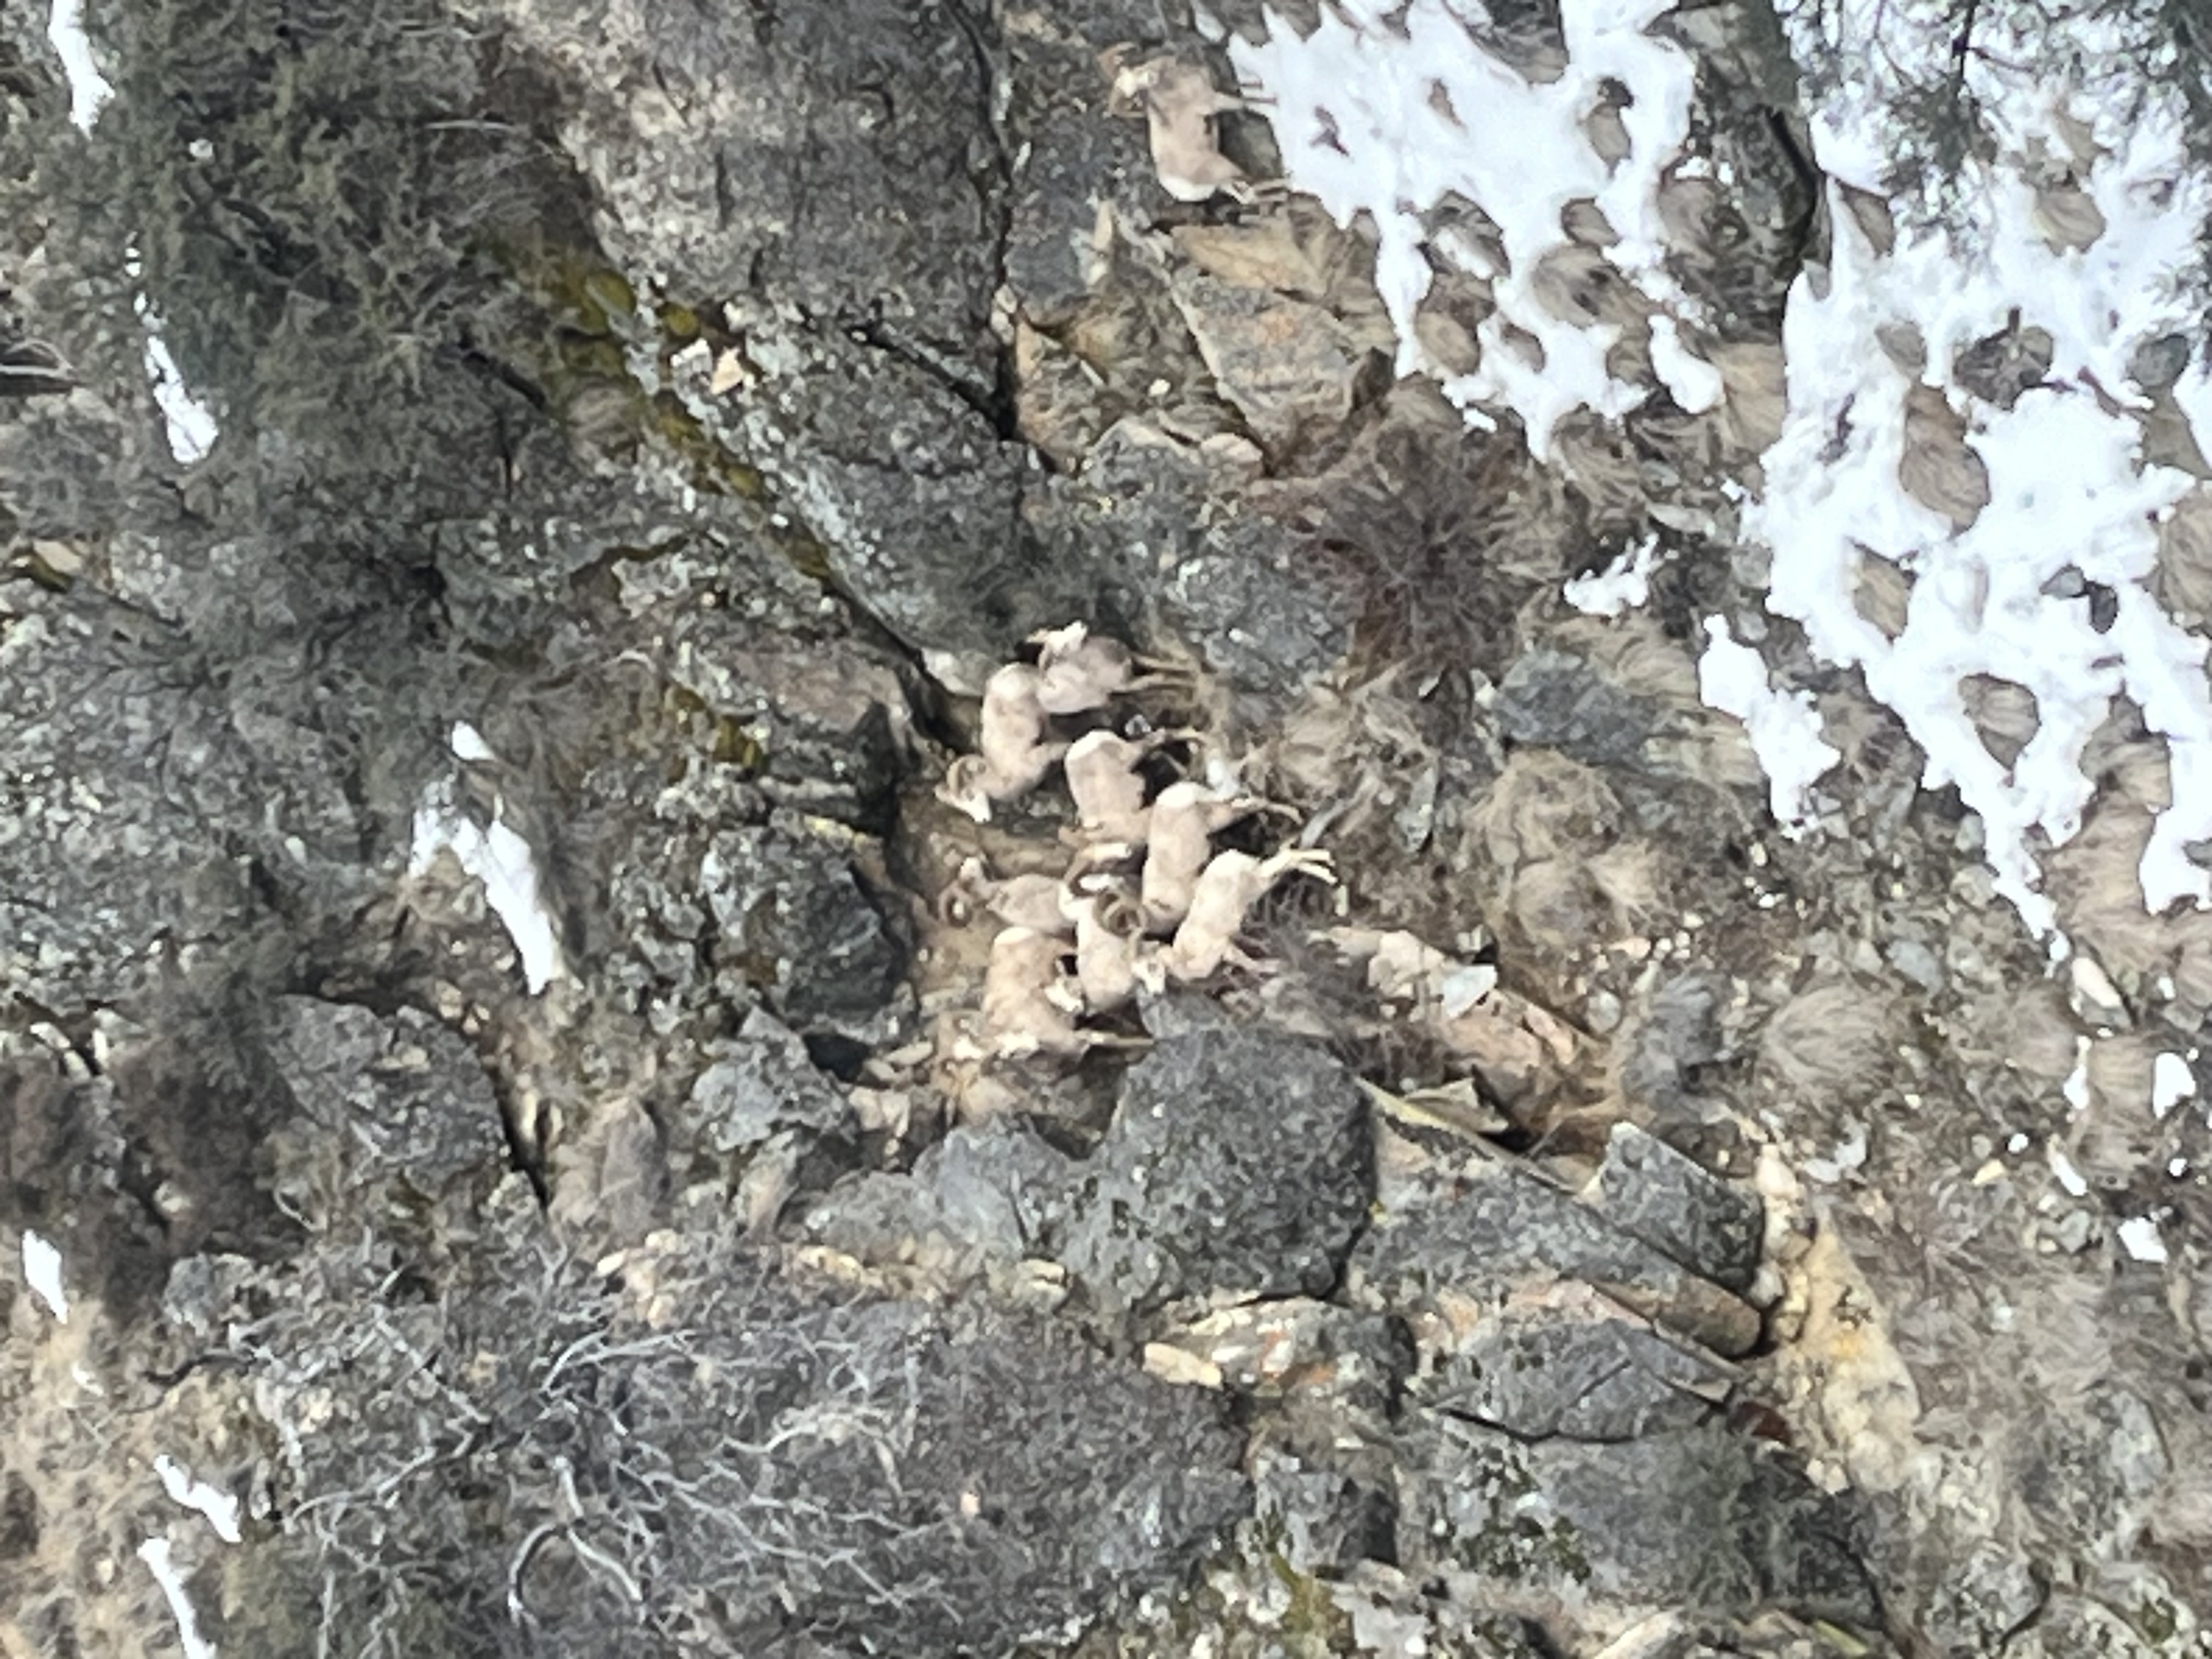 A group of bighorn crowded together on a cliff face.